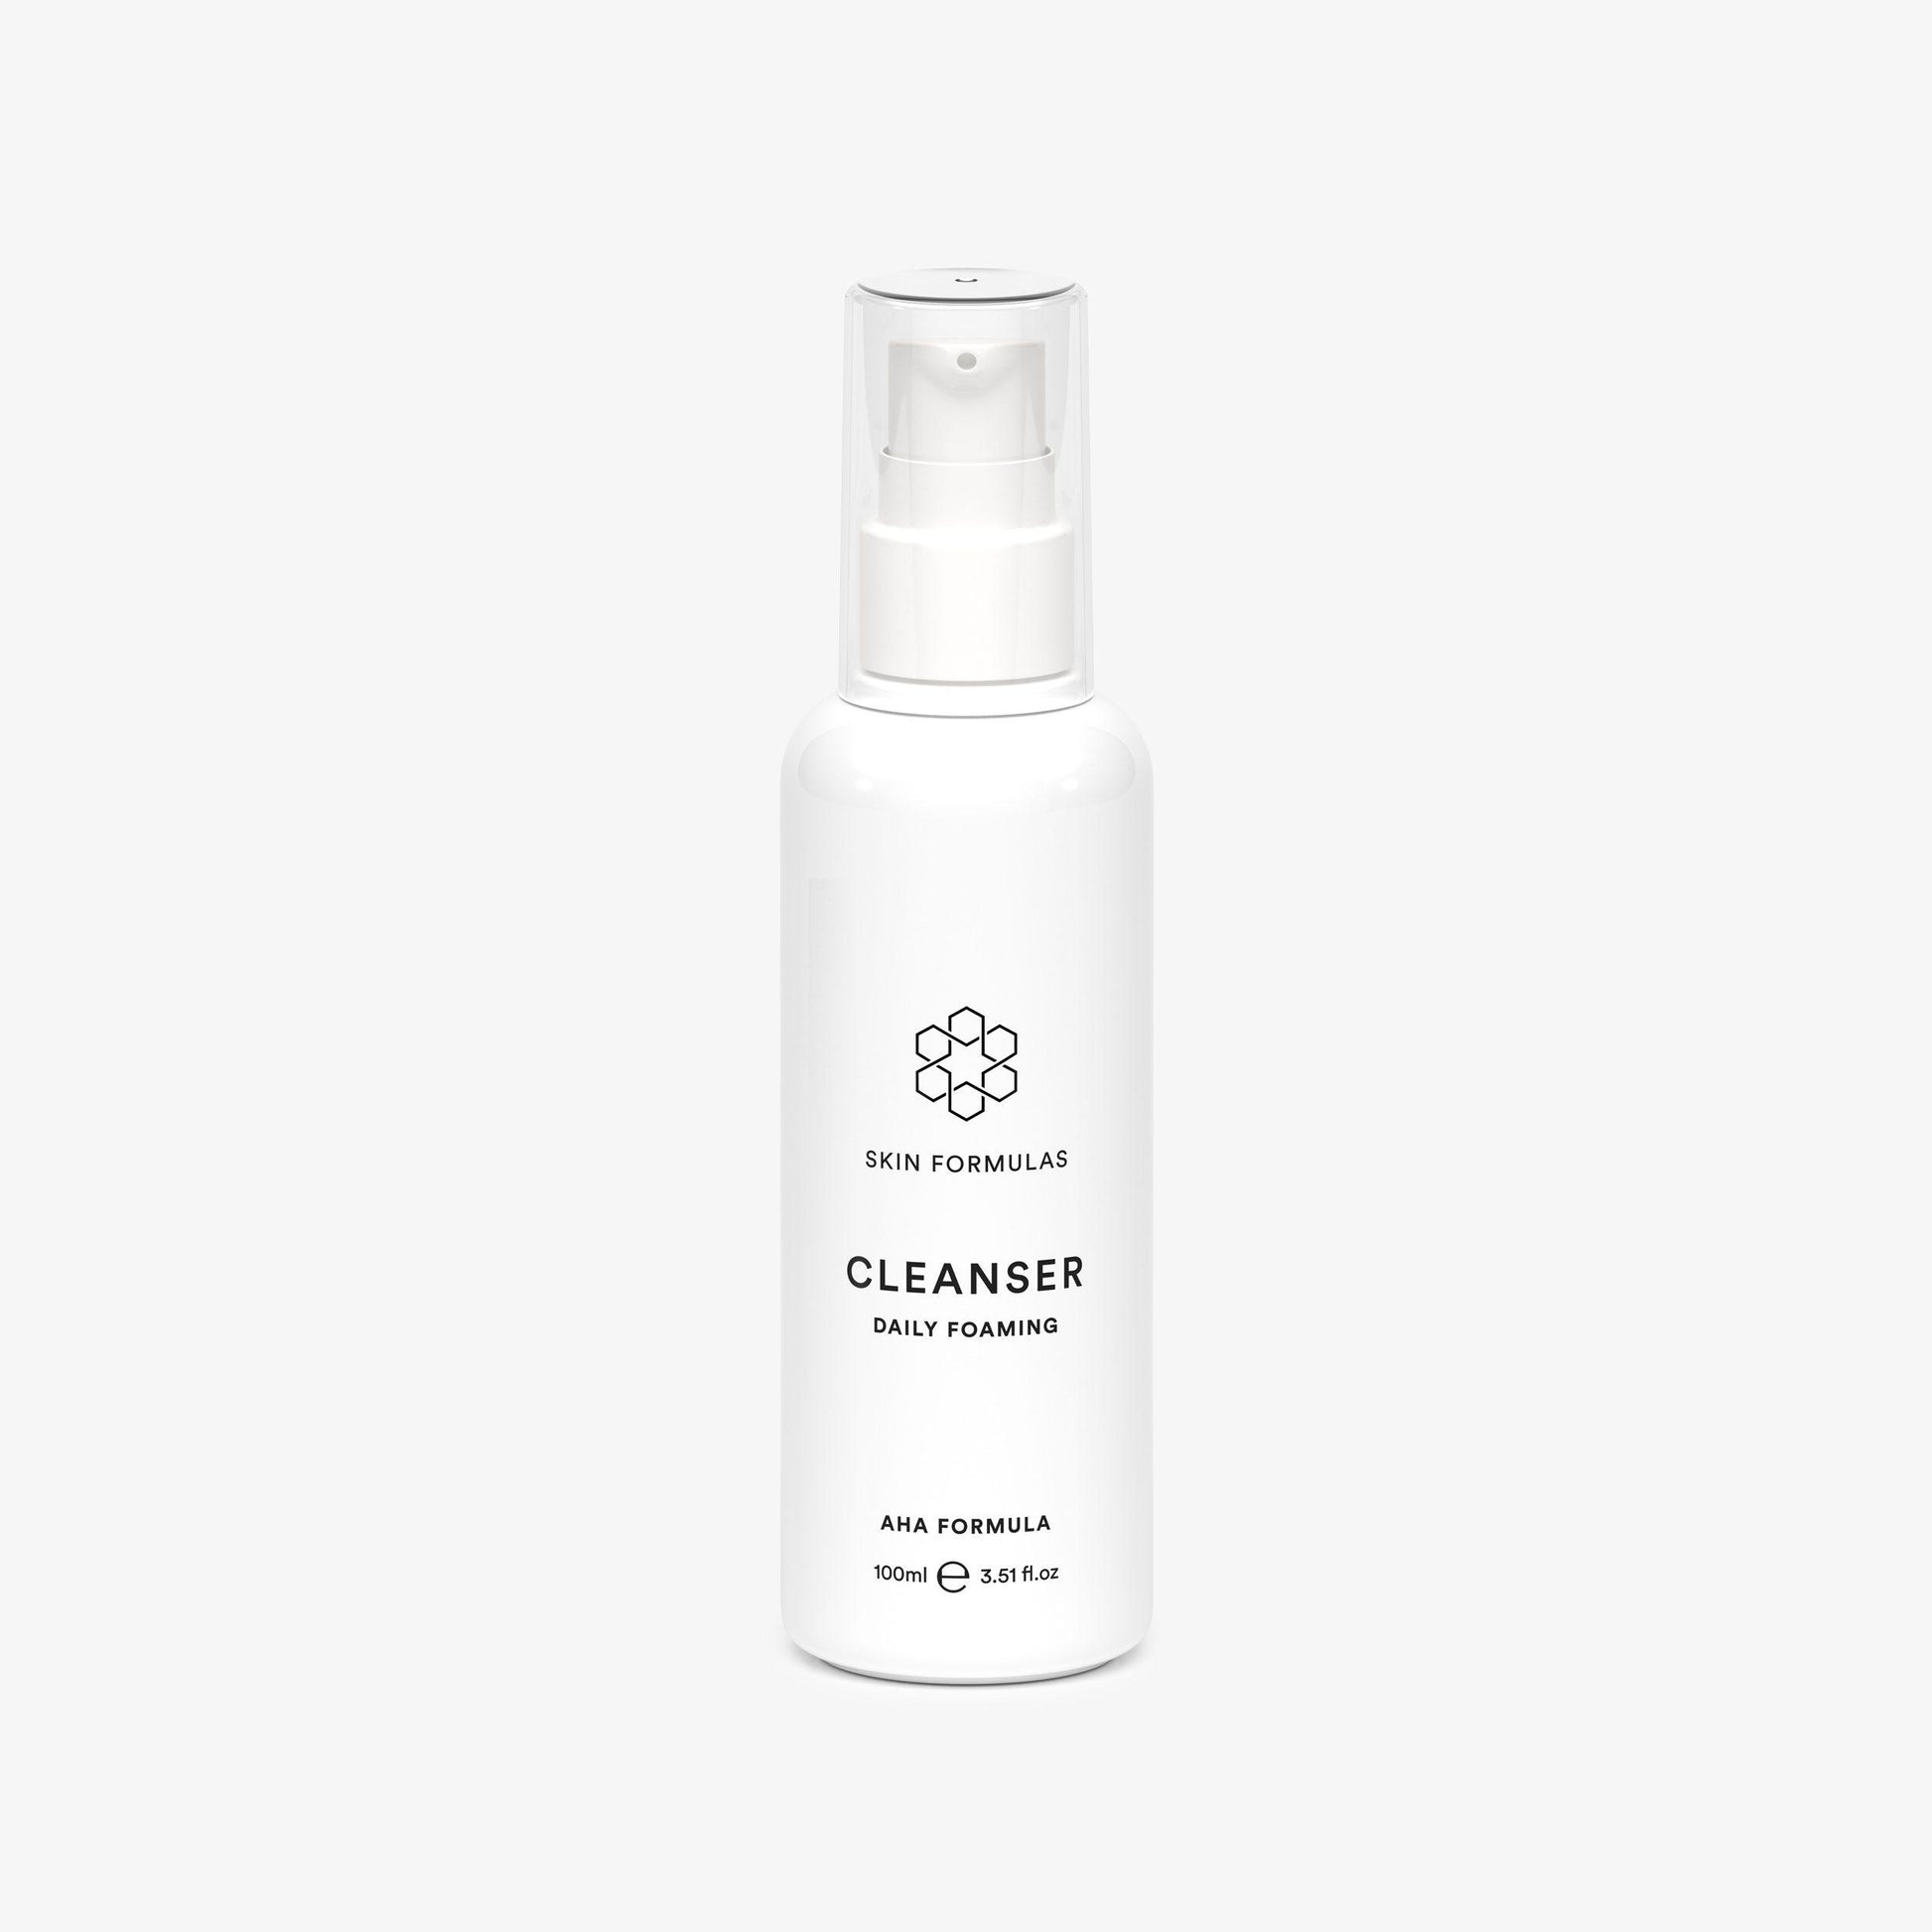 Cleanser by Skin Formulas for oily/acne prone skin